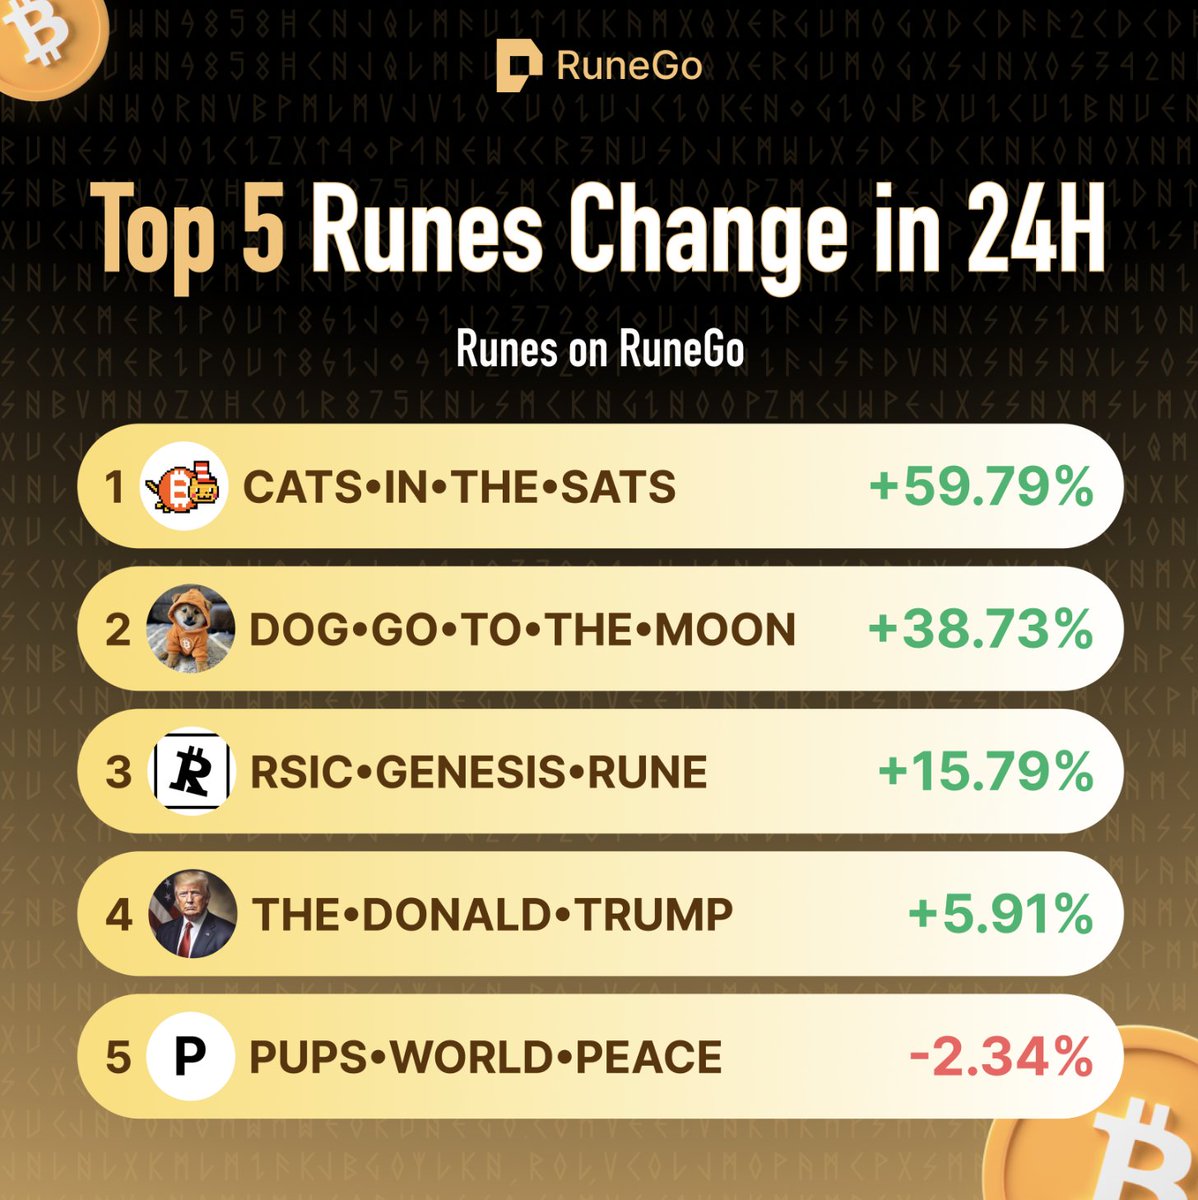 🔥 RUNES ARE INSANE 🔥
​
$CATS Took Over The Game, with the Price of $0.4255, UP 59.79% in 24H. It seems like the #Bitcoin memes meta will be $DOG vs $CATS on any other chain.
​
👇Check Out These Brilliant #Runes On #RuneGo
​
CATS•IN•THE•SATS ( @catsinthesats )